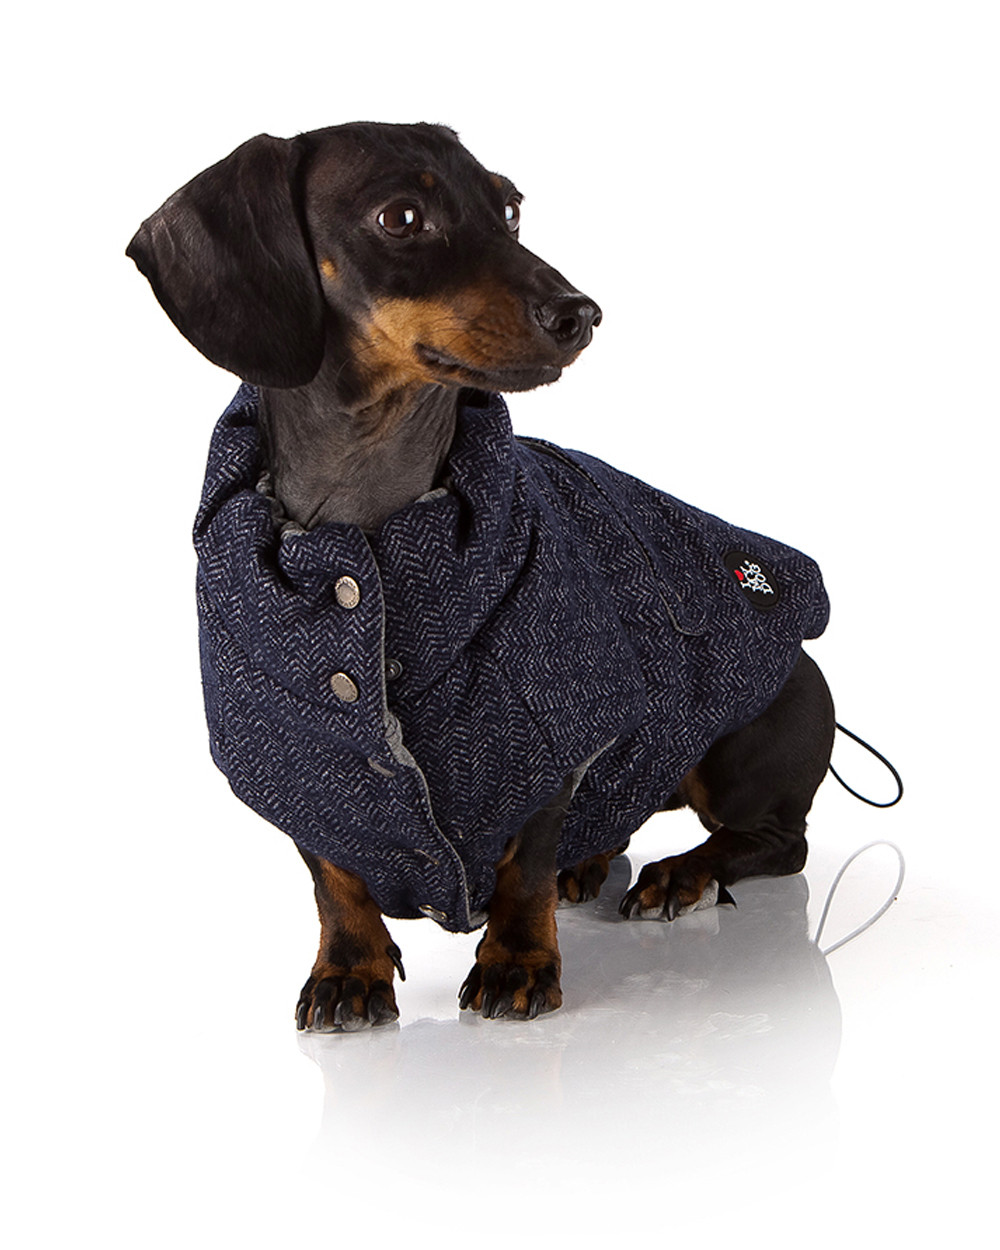 Jacket for Dogs - Free Shipping